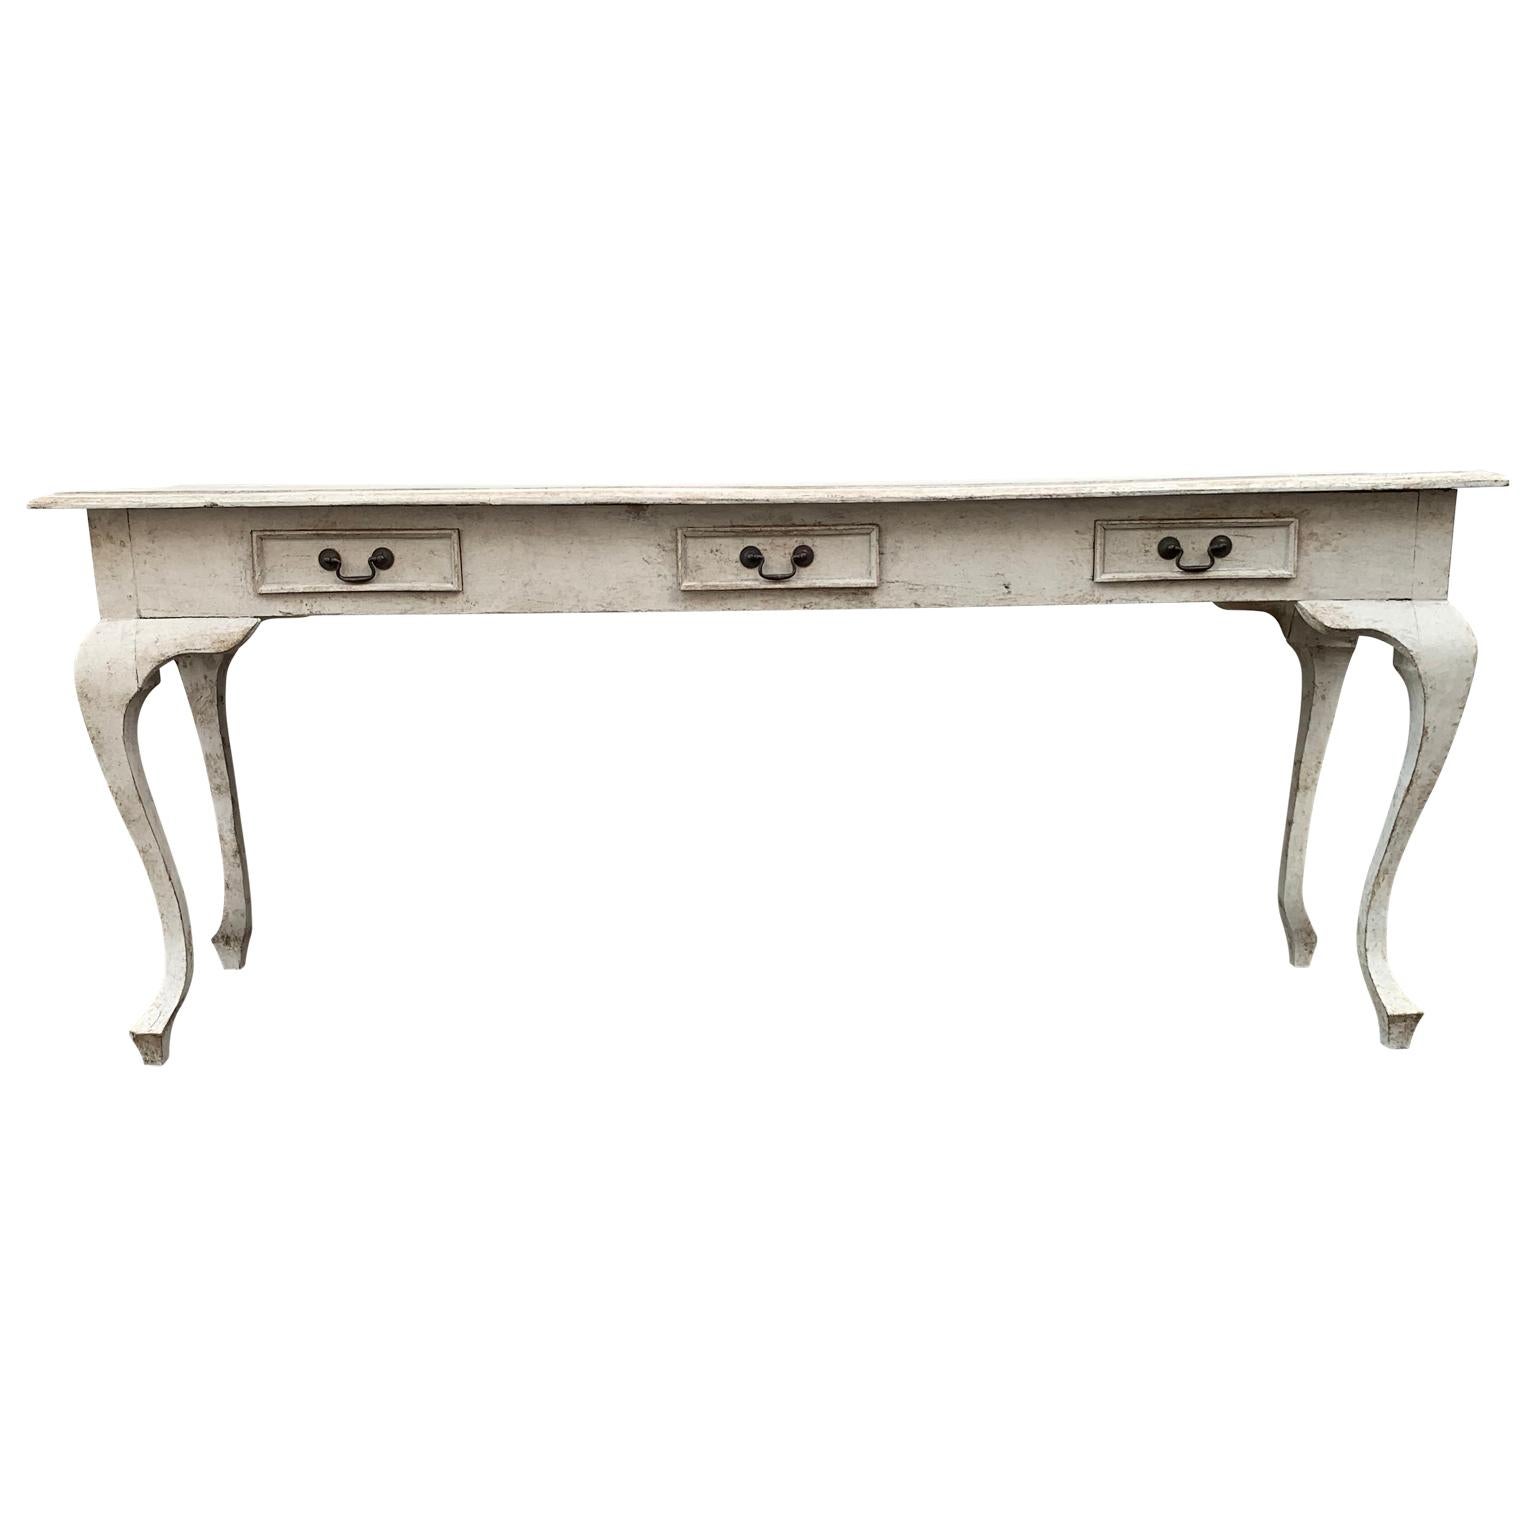 Swedish Gustavian style light grey painted console with 3 drawers.